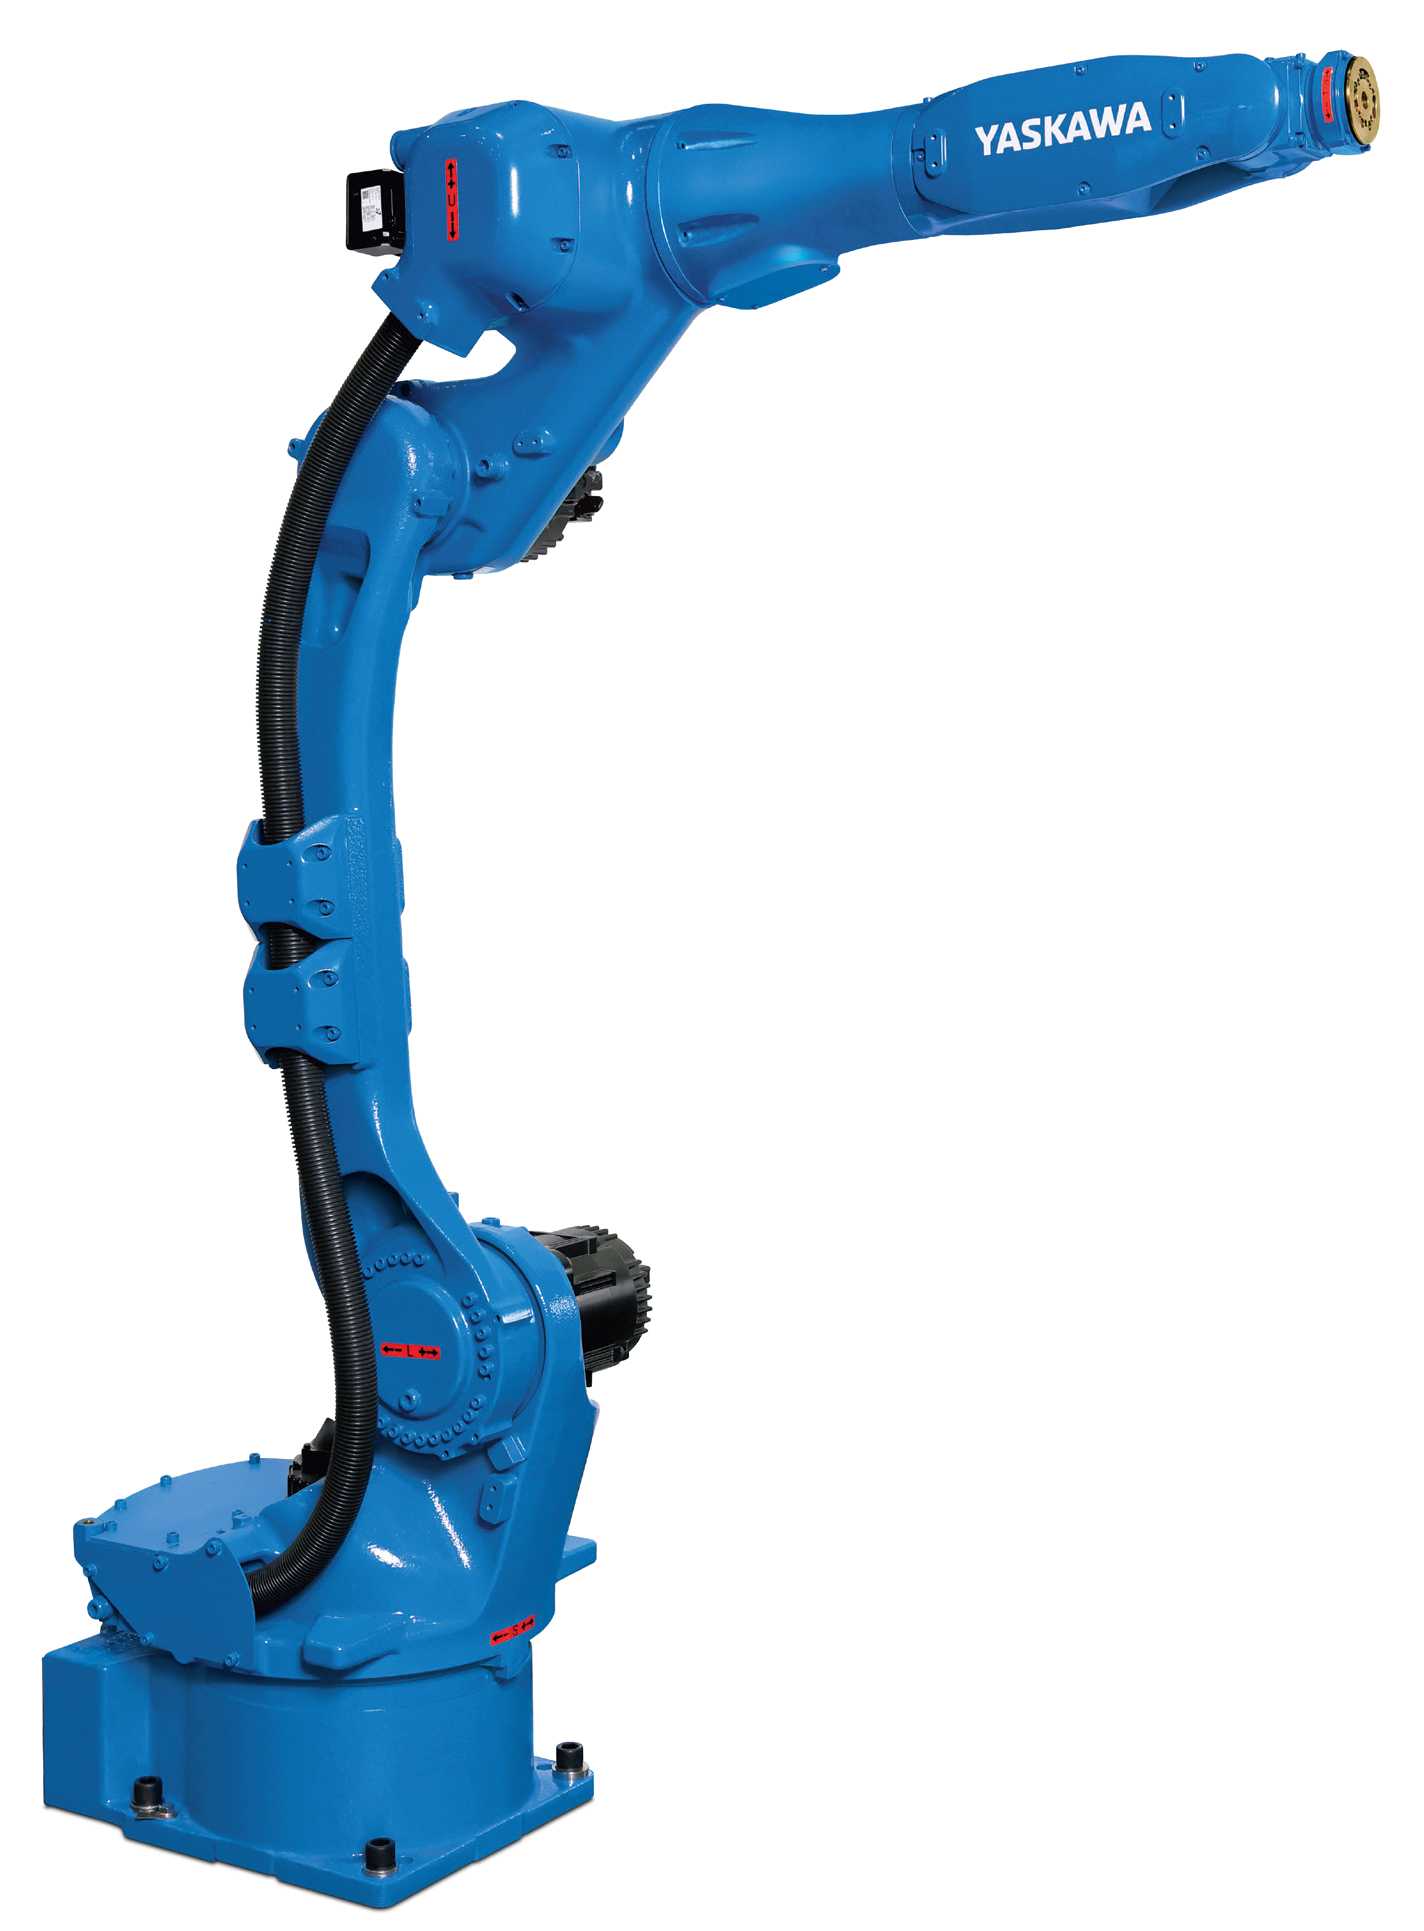 Extremely Fast, Space-Efficient Yaskawa GP8L Extended Reach Robot Optimizes Throughput in Tight Production Spaces